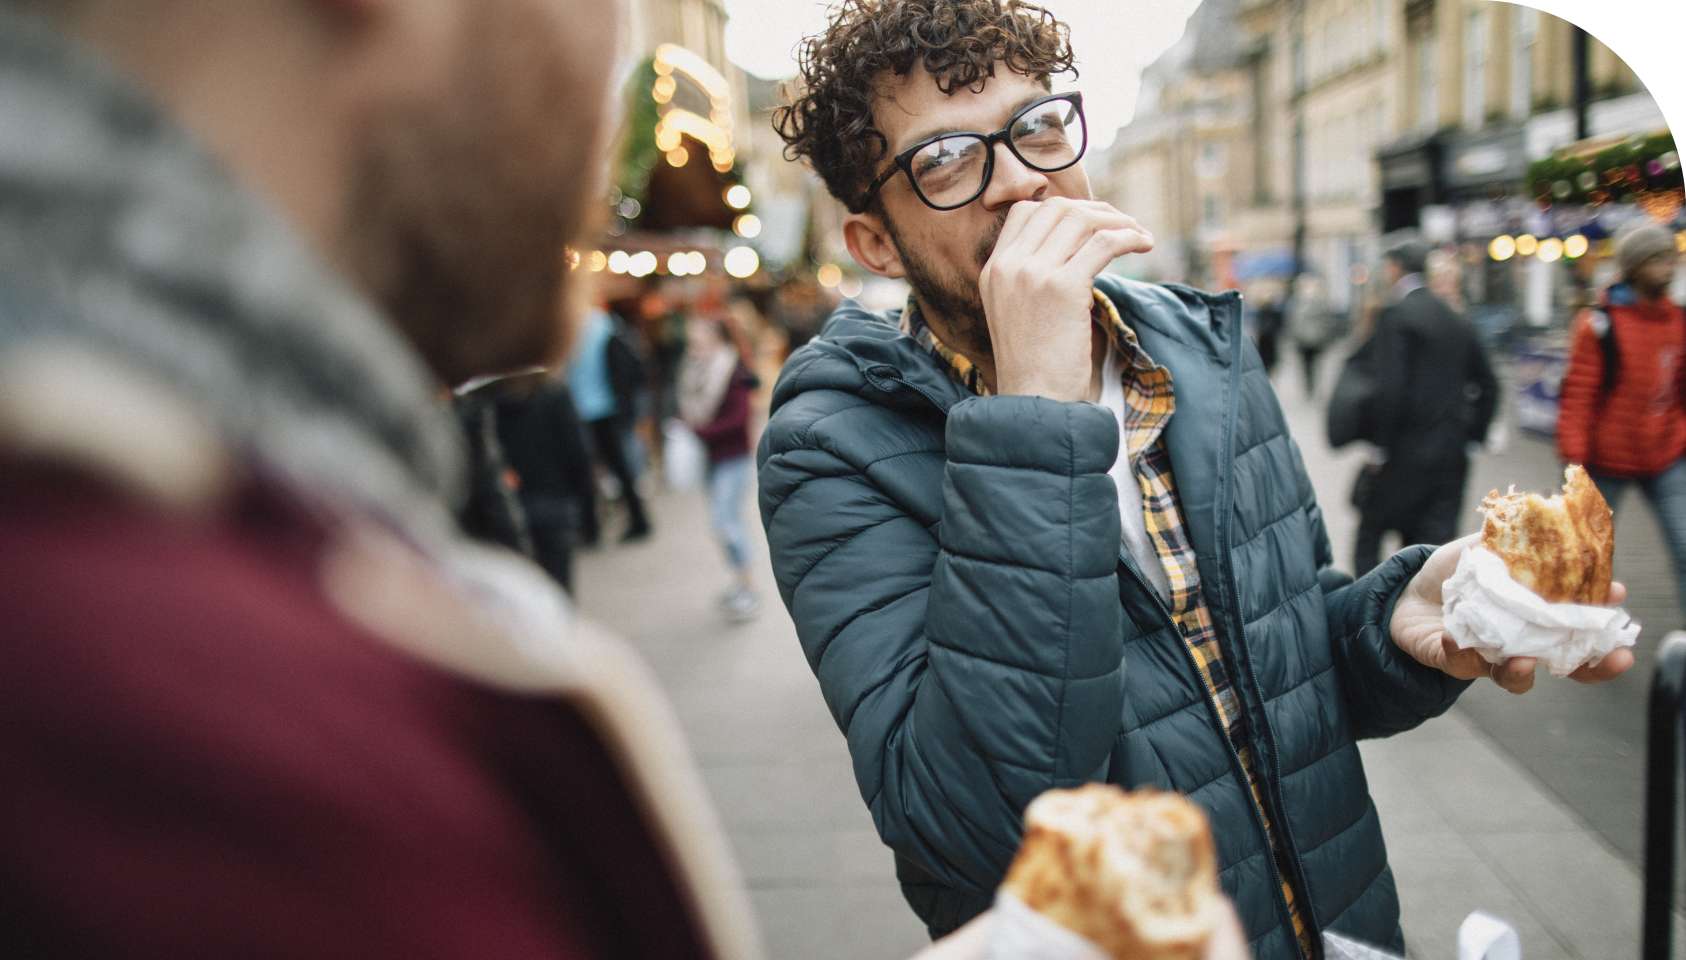 A young man wearing black framed glasses and a blue coat is at an outdoor event in the city eating a sandwich while talking to a friend